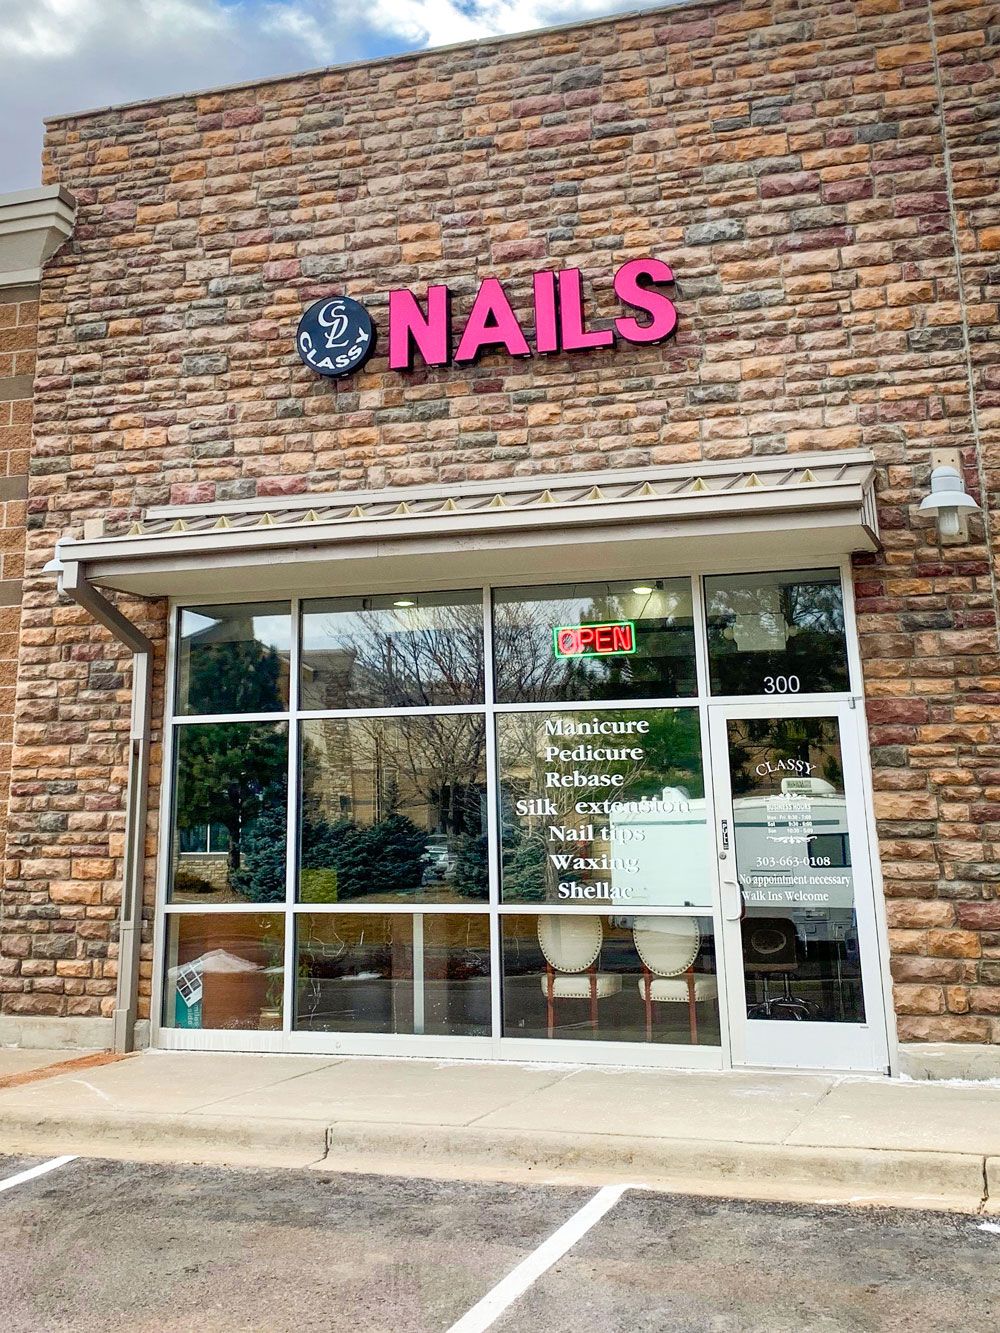 Dad takes son for manicure after teacher's comment - Scoop Upworthy